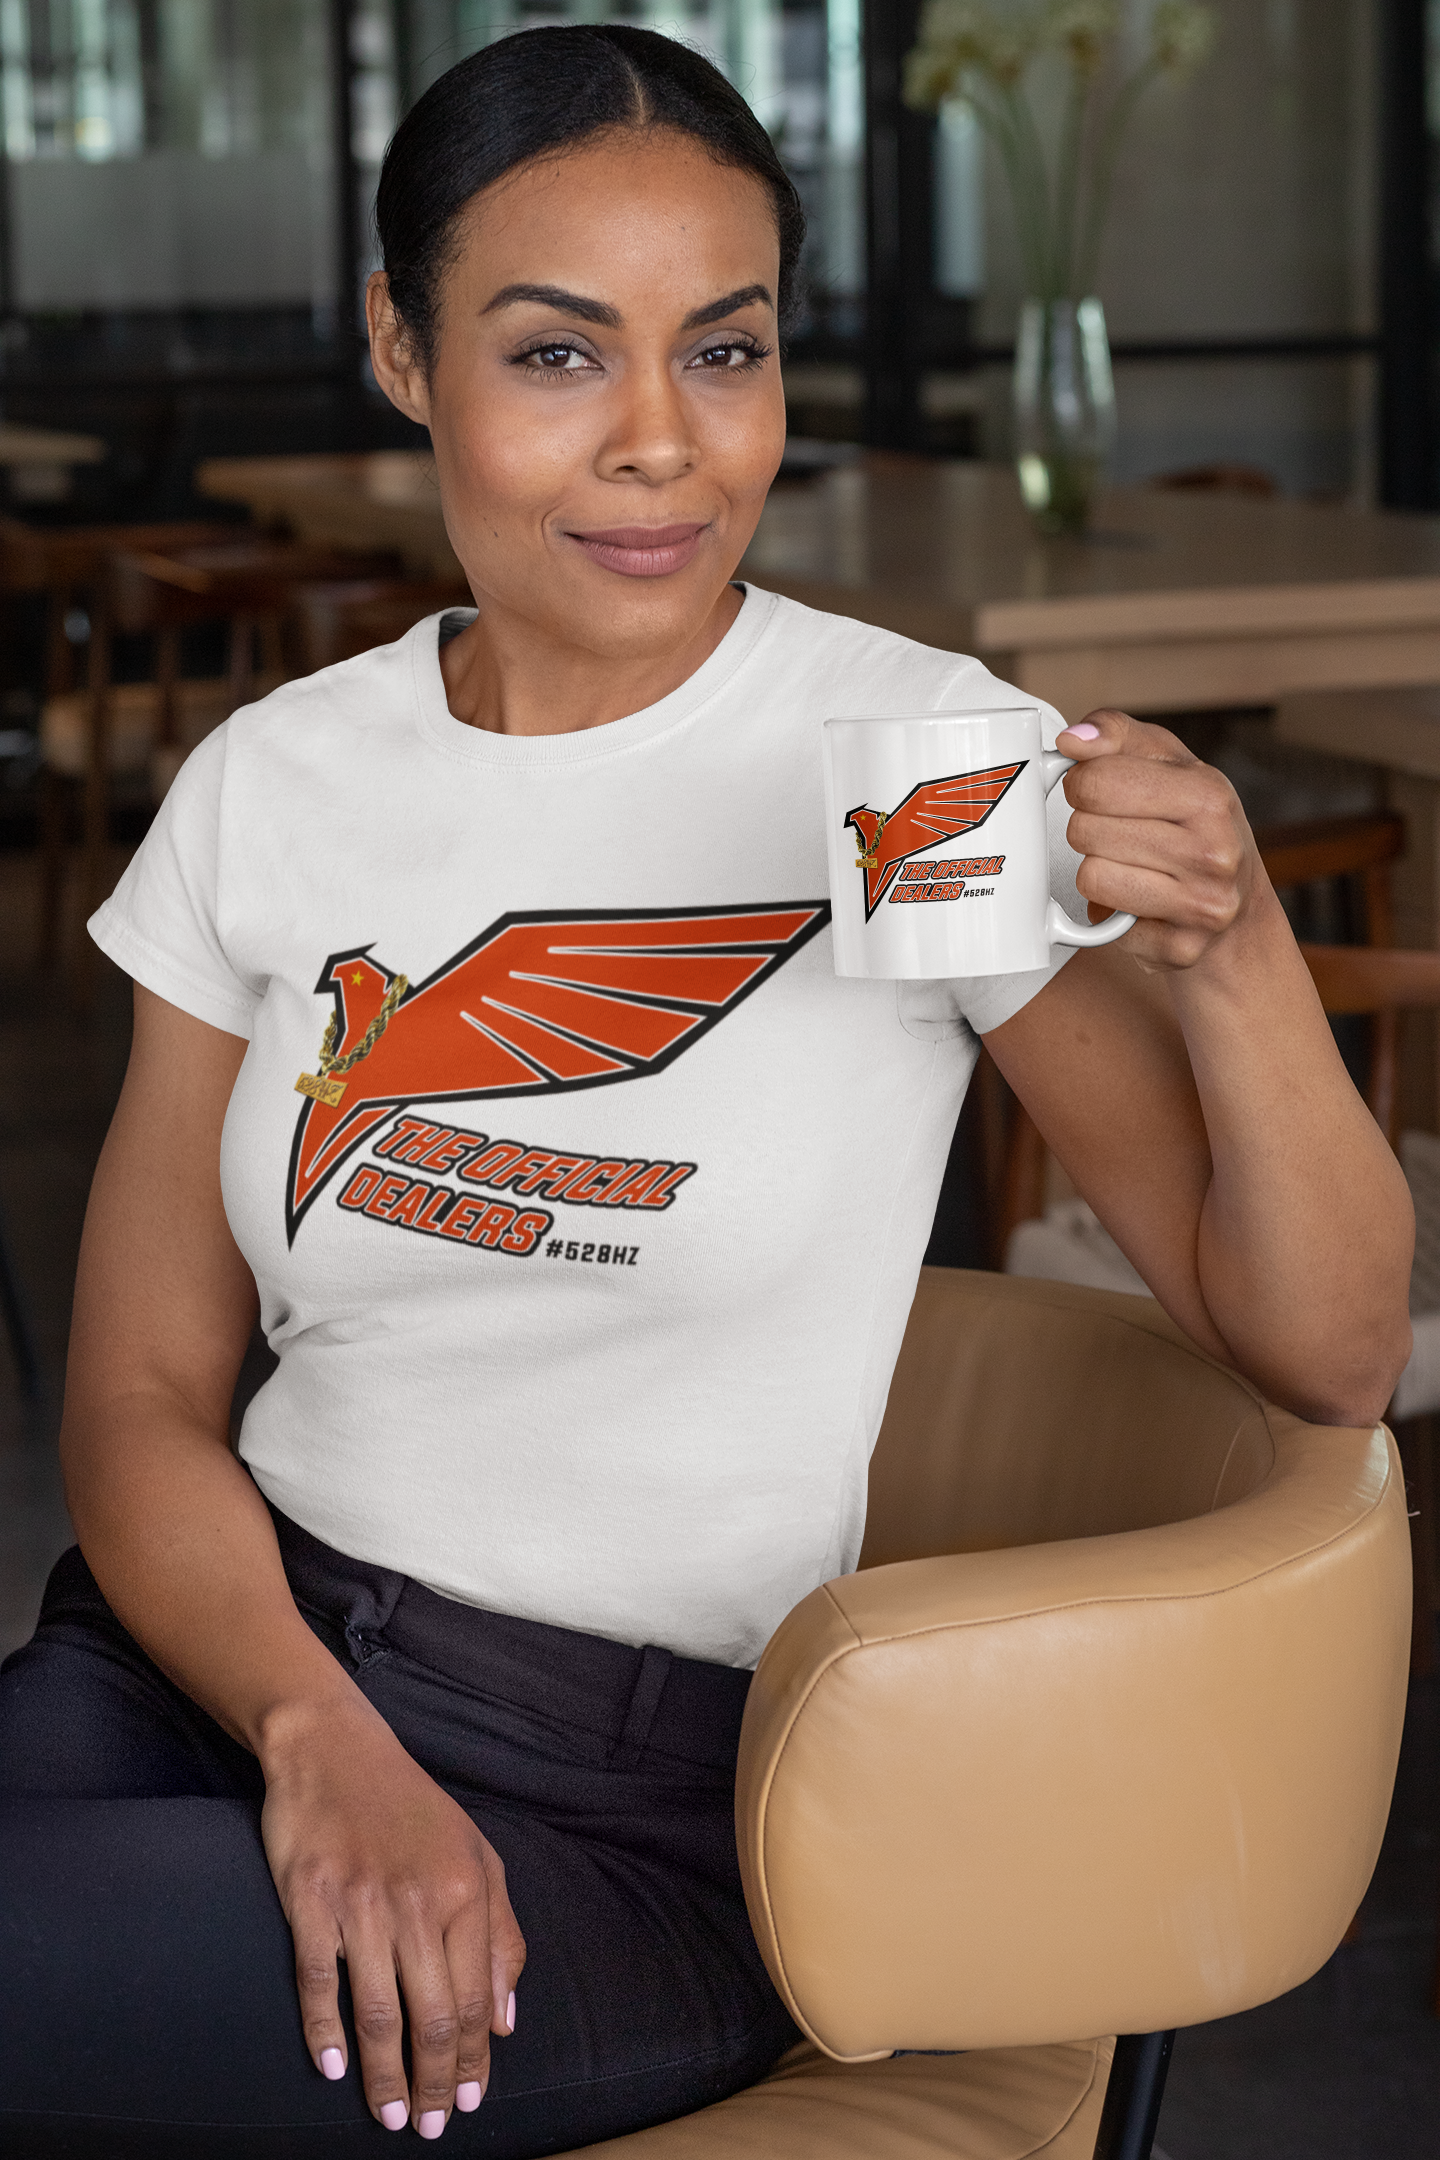 The Official Dealers Extra Comfy Everyday T-Shirt For Ladies. - The Official Dealers